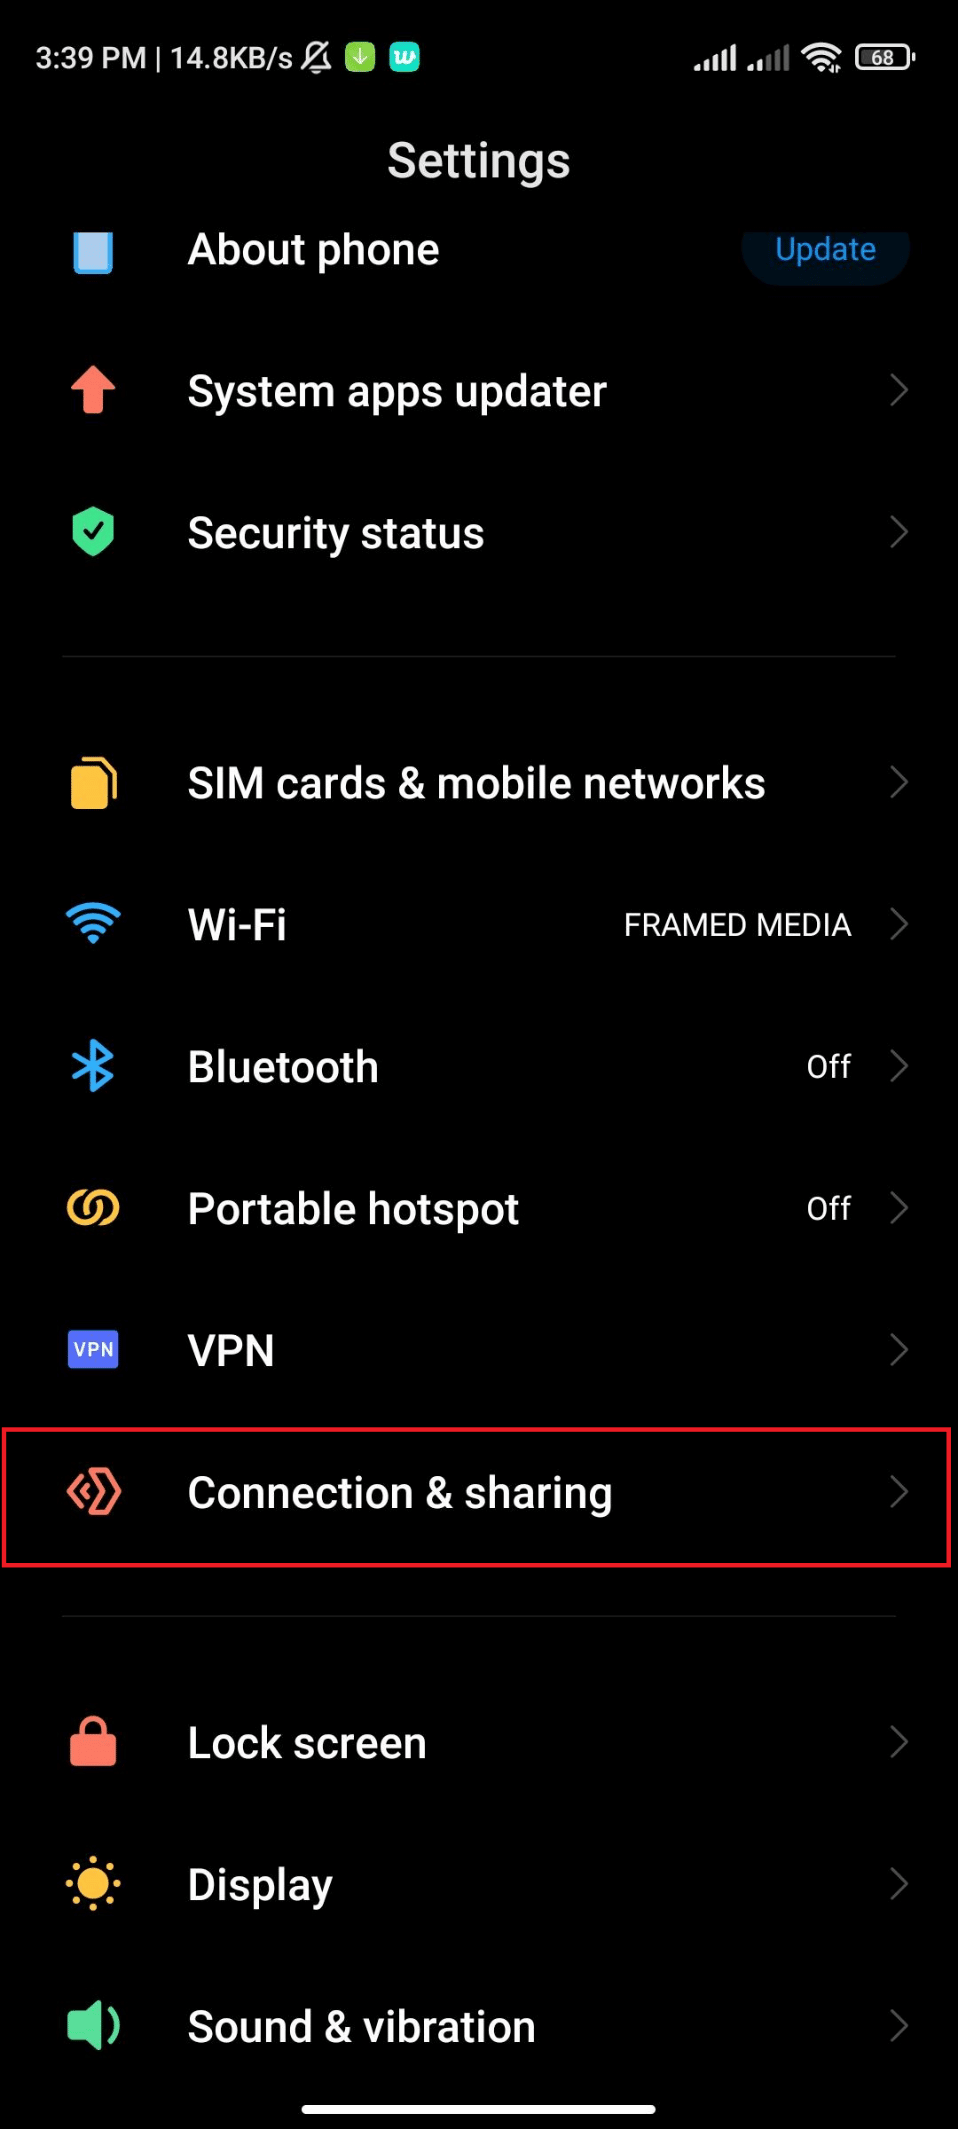 Head back to Settings and tap on Connection and sharing